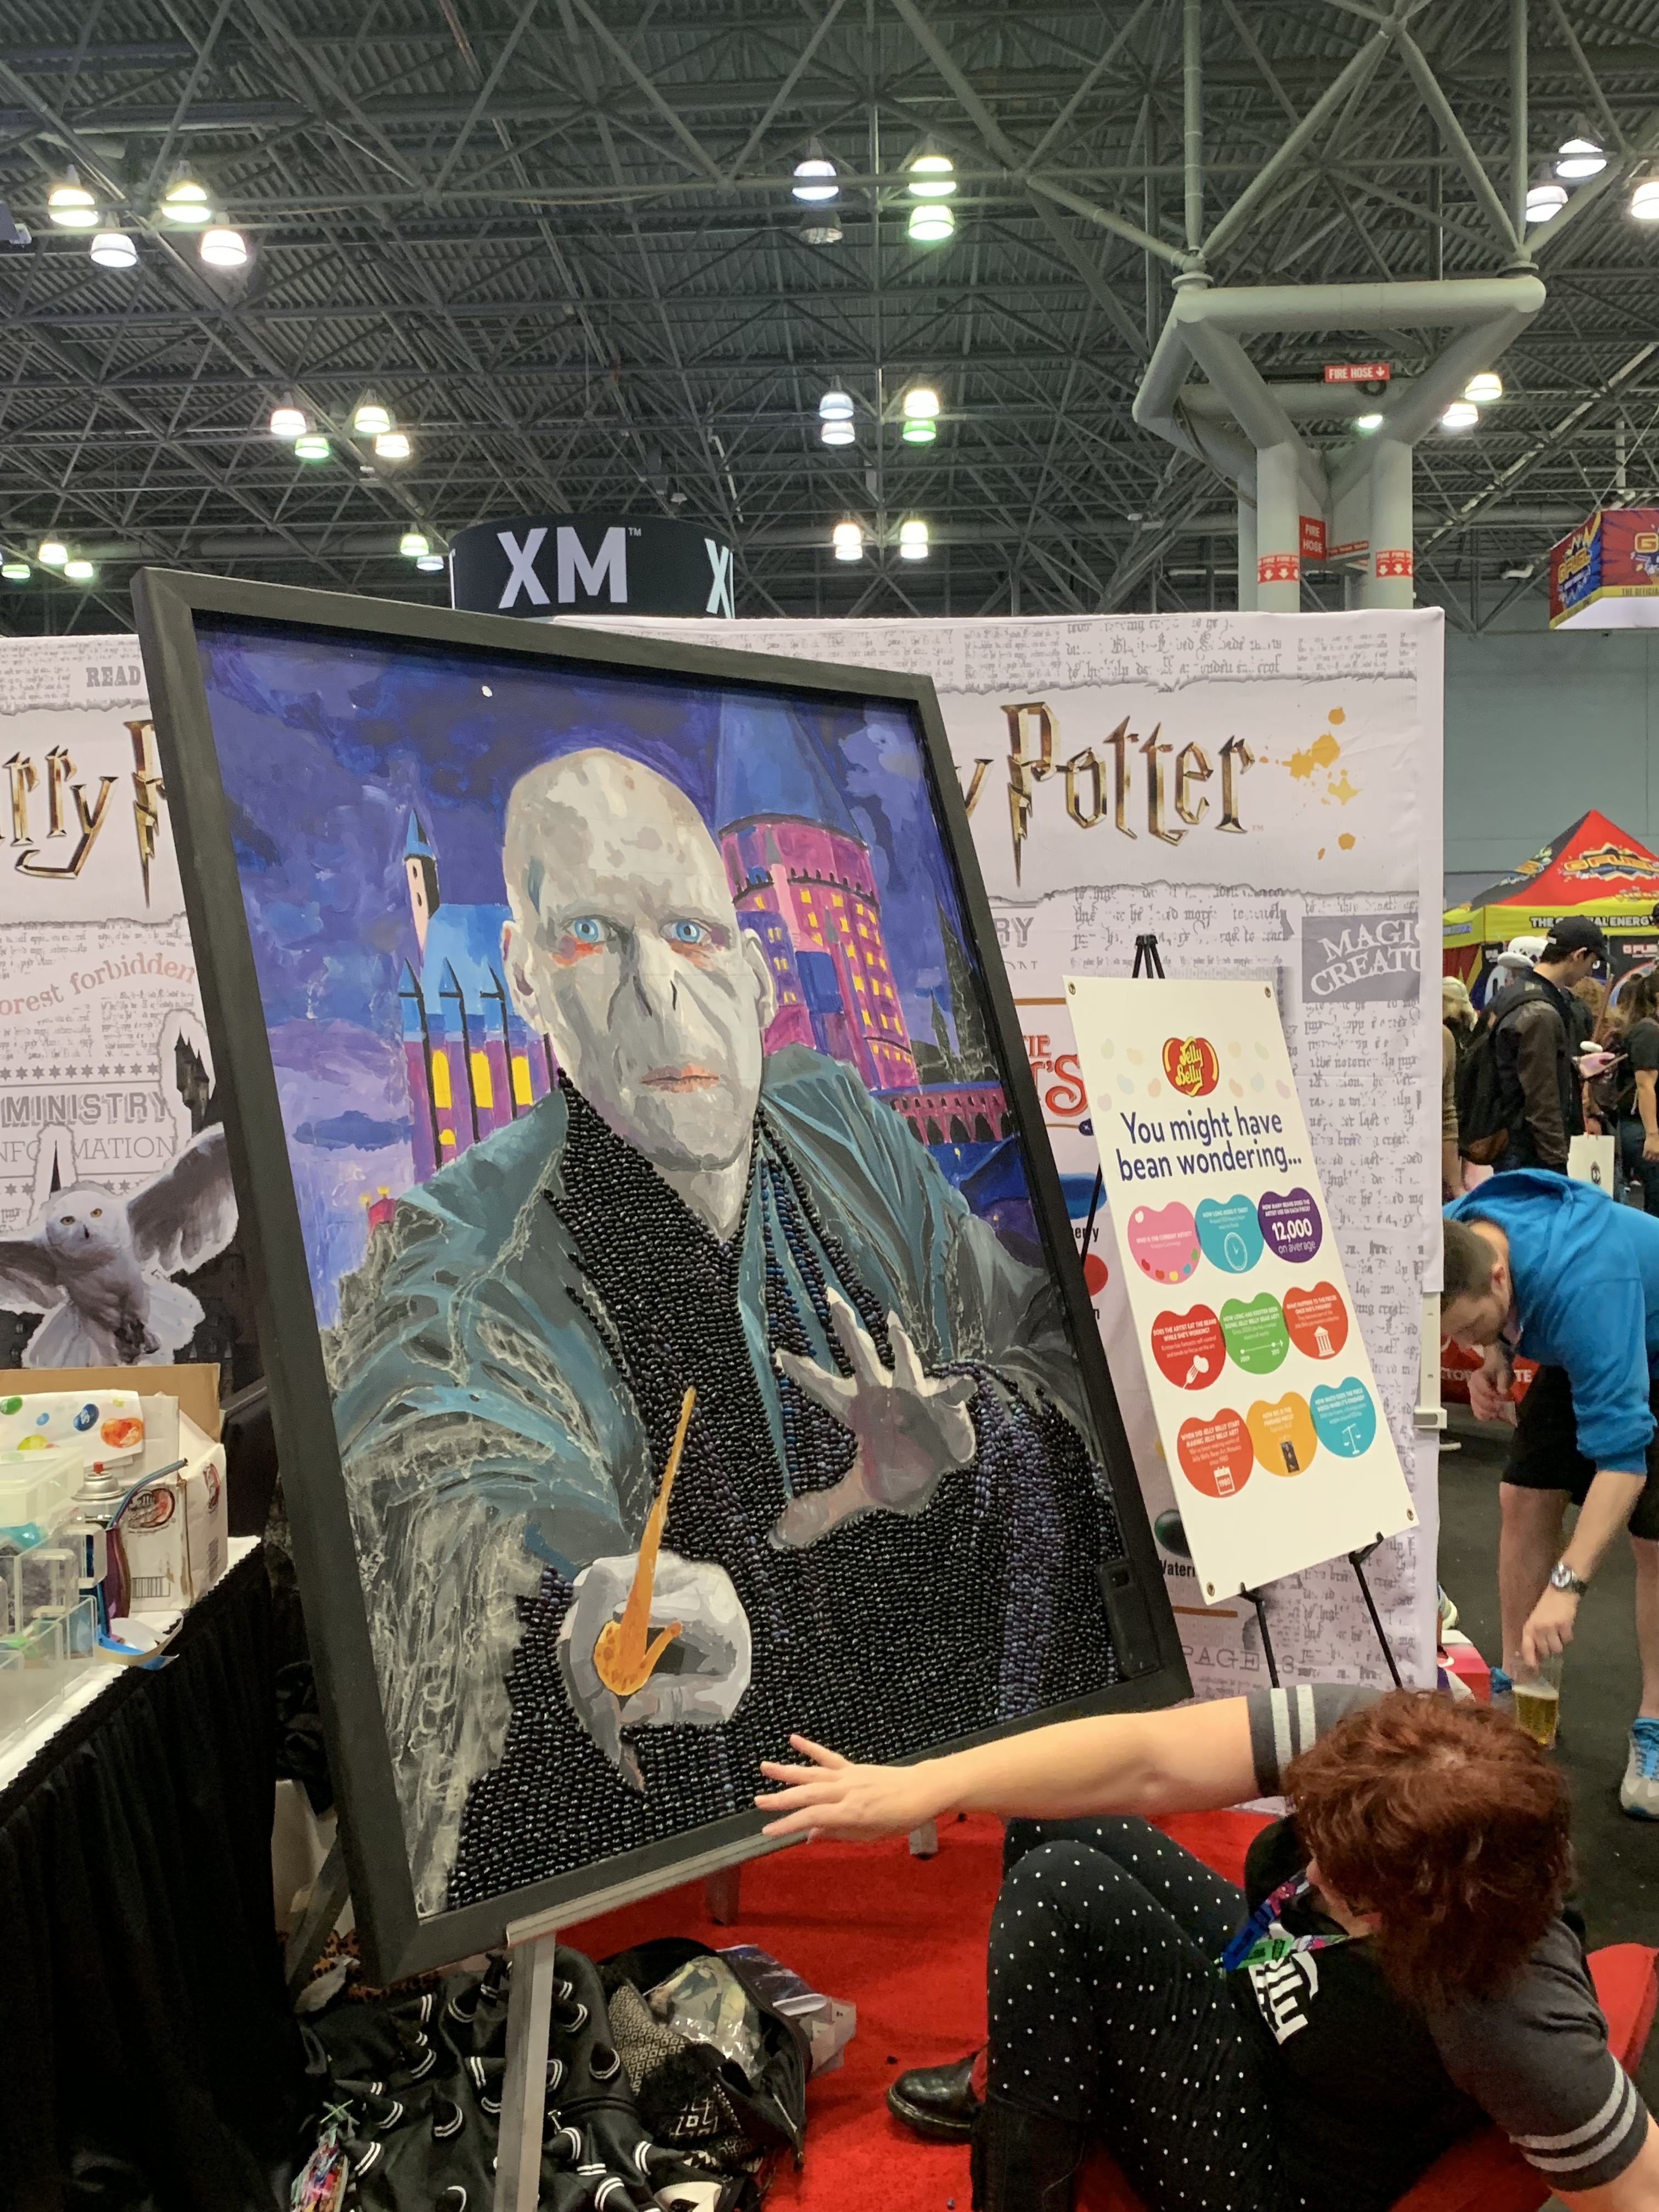 Check out Cummings’ next “Potter”-themed portrait: Voldemort is a work in progress.